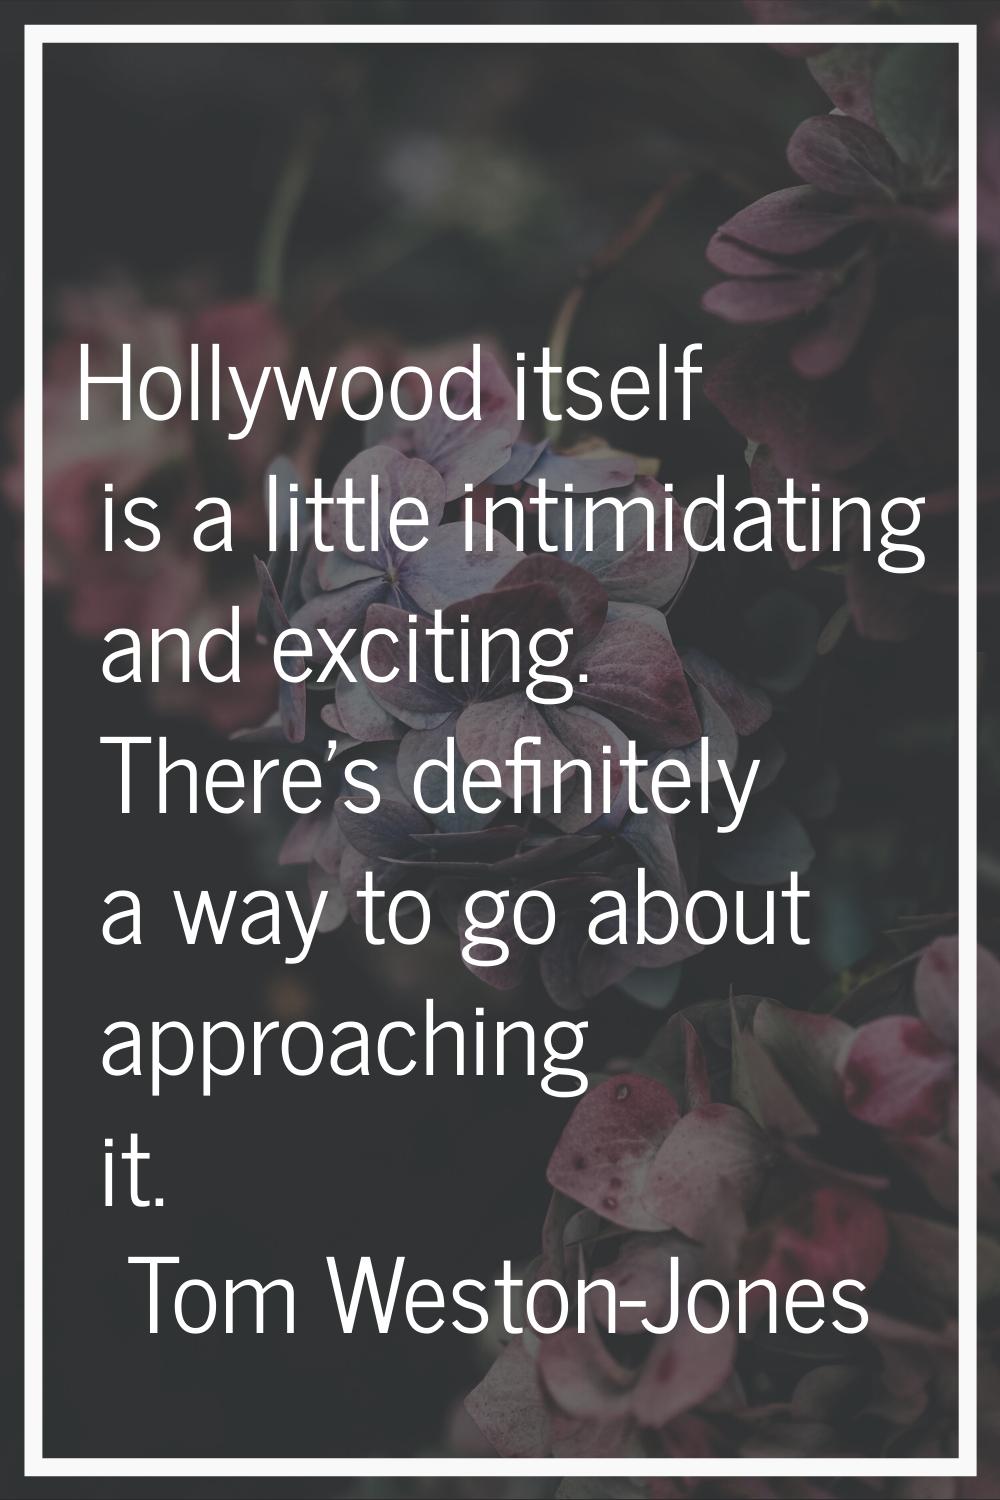 Hollywood itself is a little intimidating and exciting. There's definitely a way to go about approa